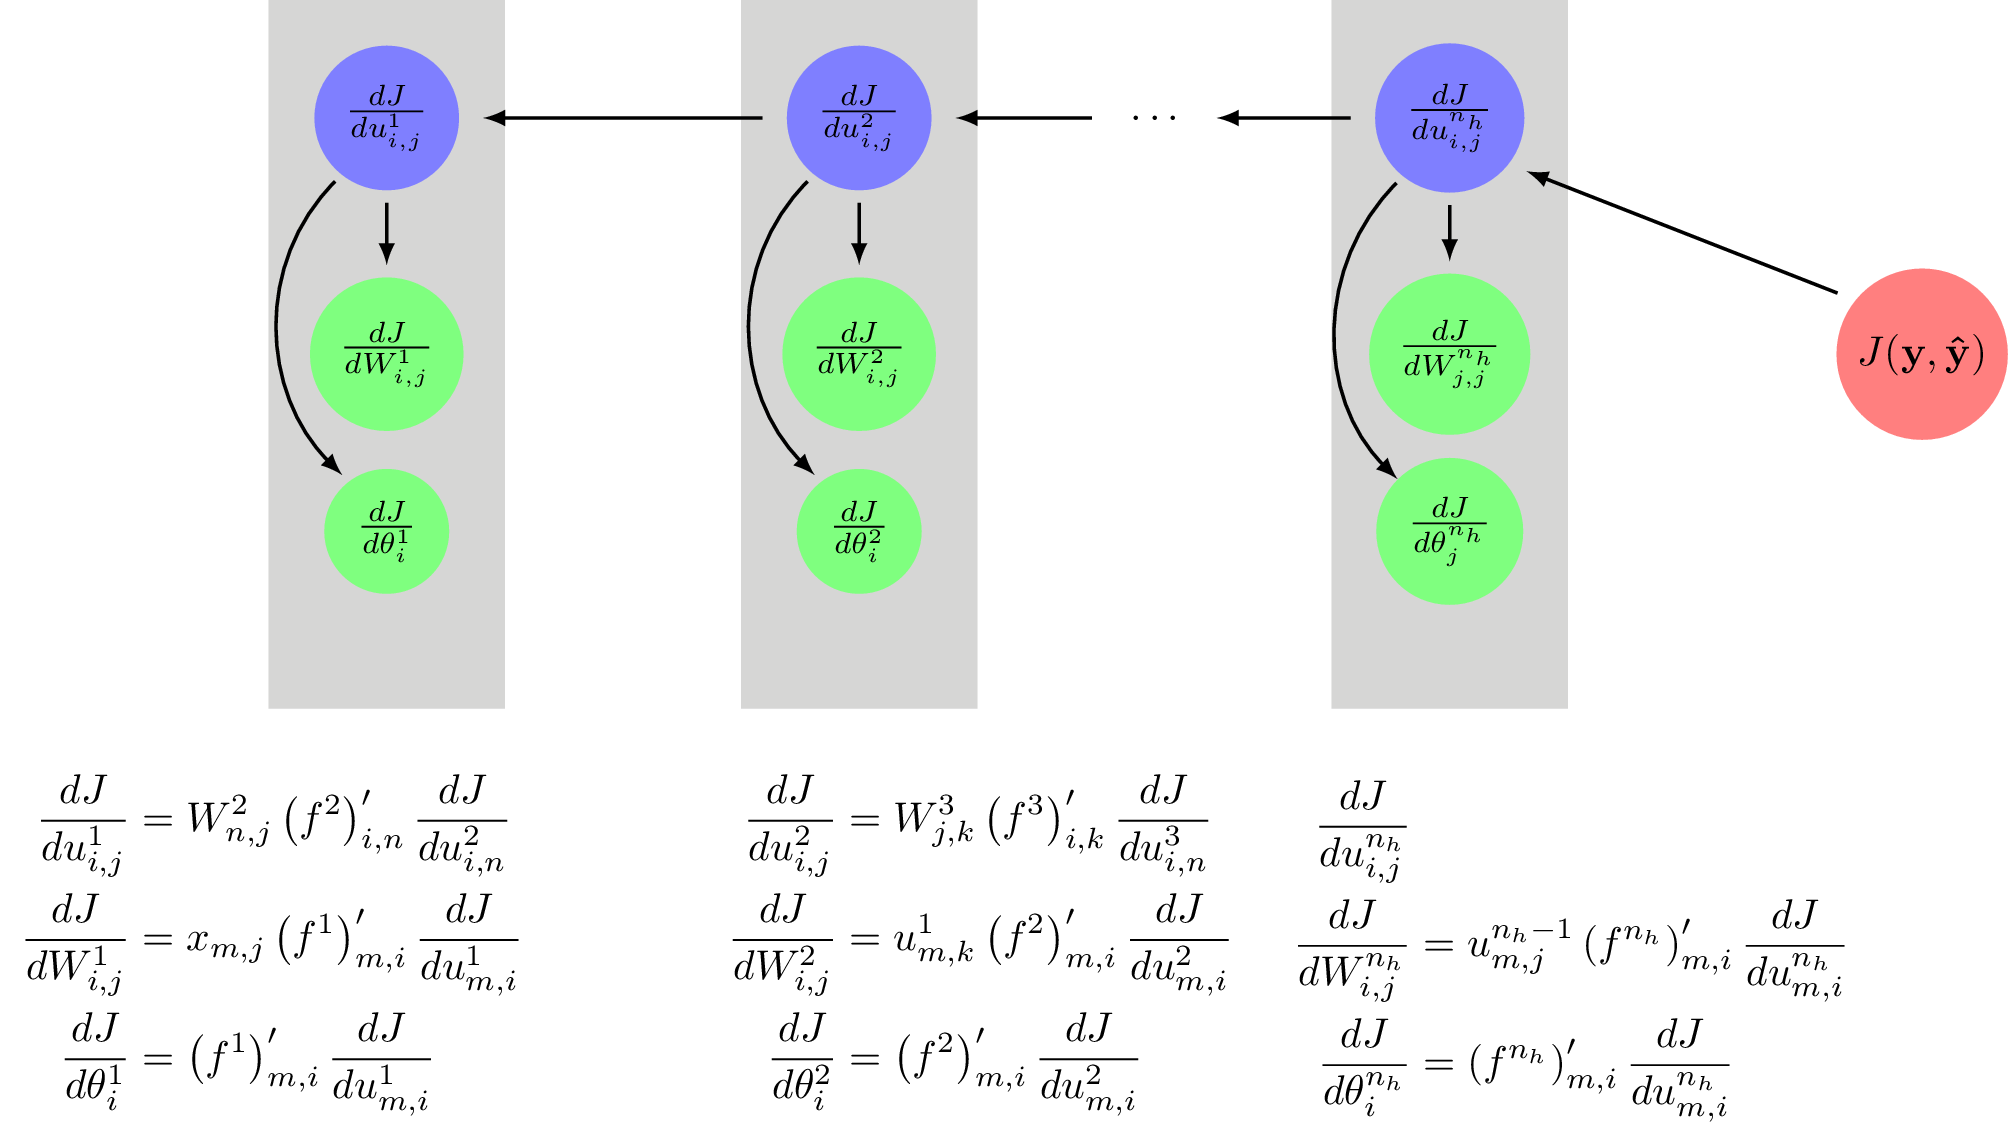 Figure 2: Backward propagation of the error of the neural network prediction through the neural network.